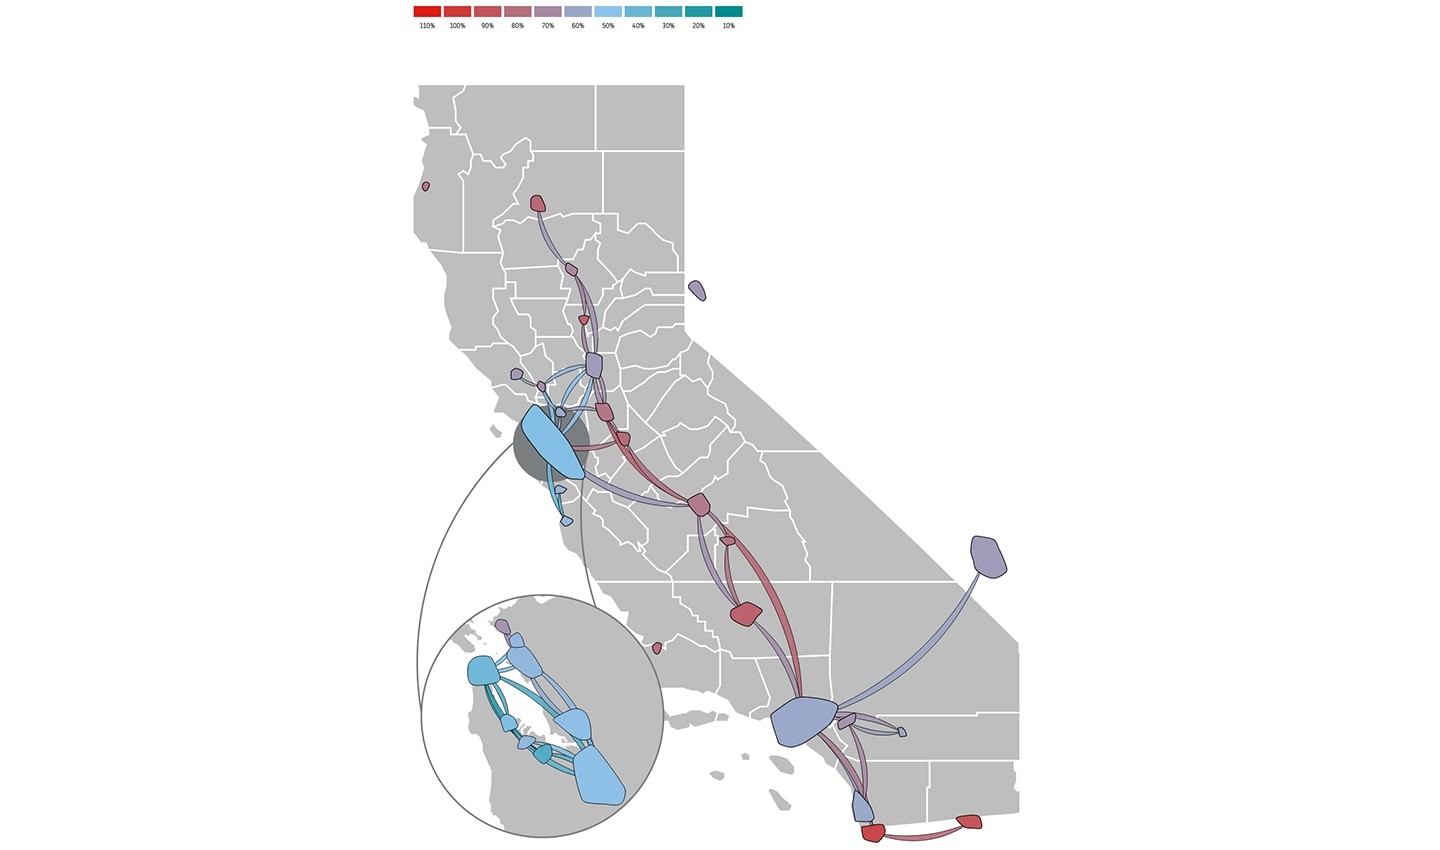 Remaining mobility in California between March 14, 2020 and March 20, 2020 as a percentage of January traffic.